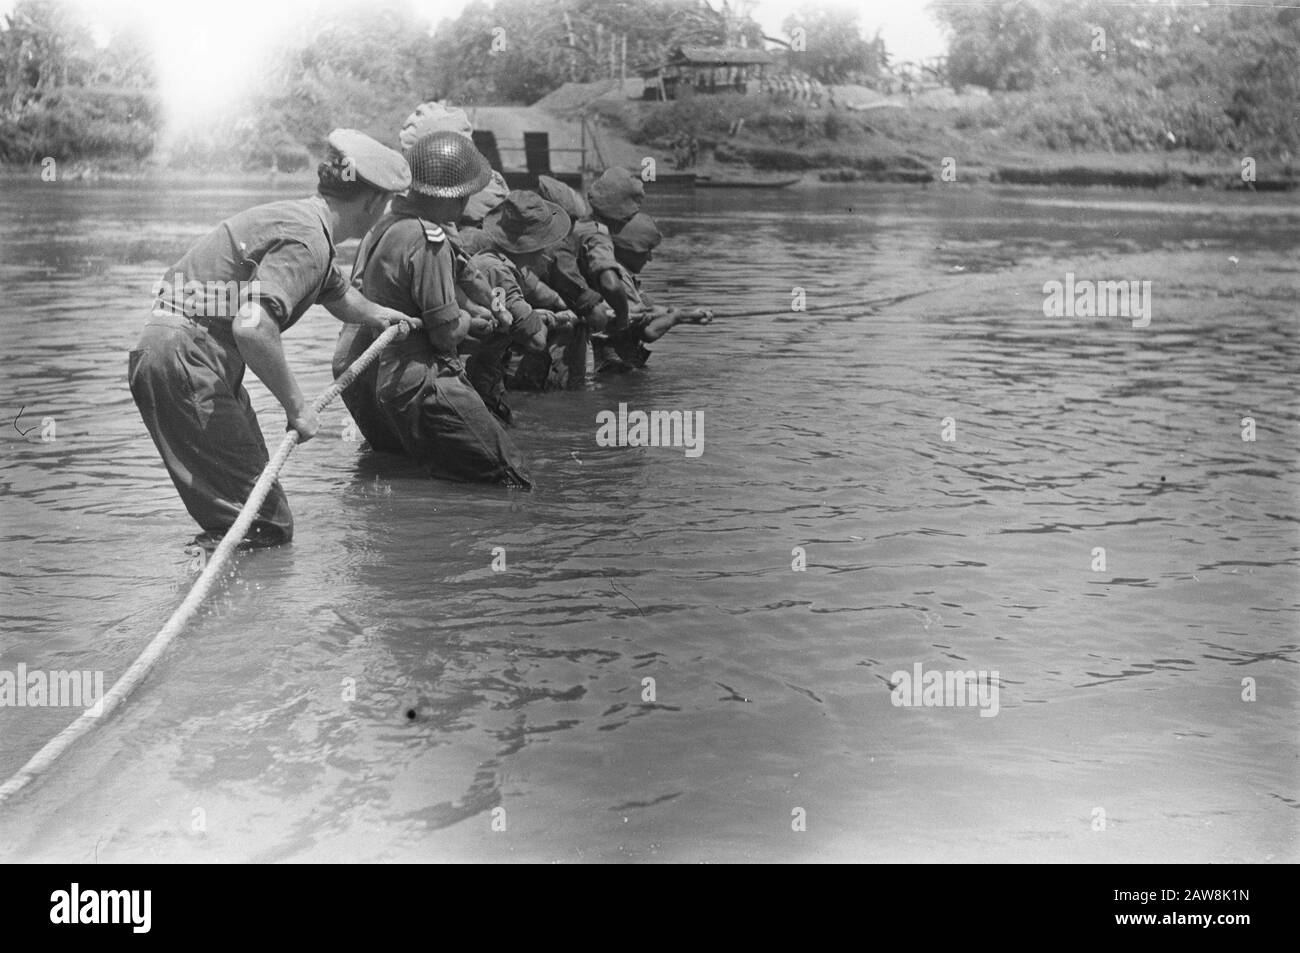 [Exercise? A row of soldiers standing in a river and pulling a long rope] Date: October 1948 Location: Indonesia Dutch East Indies Stock Photo